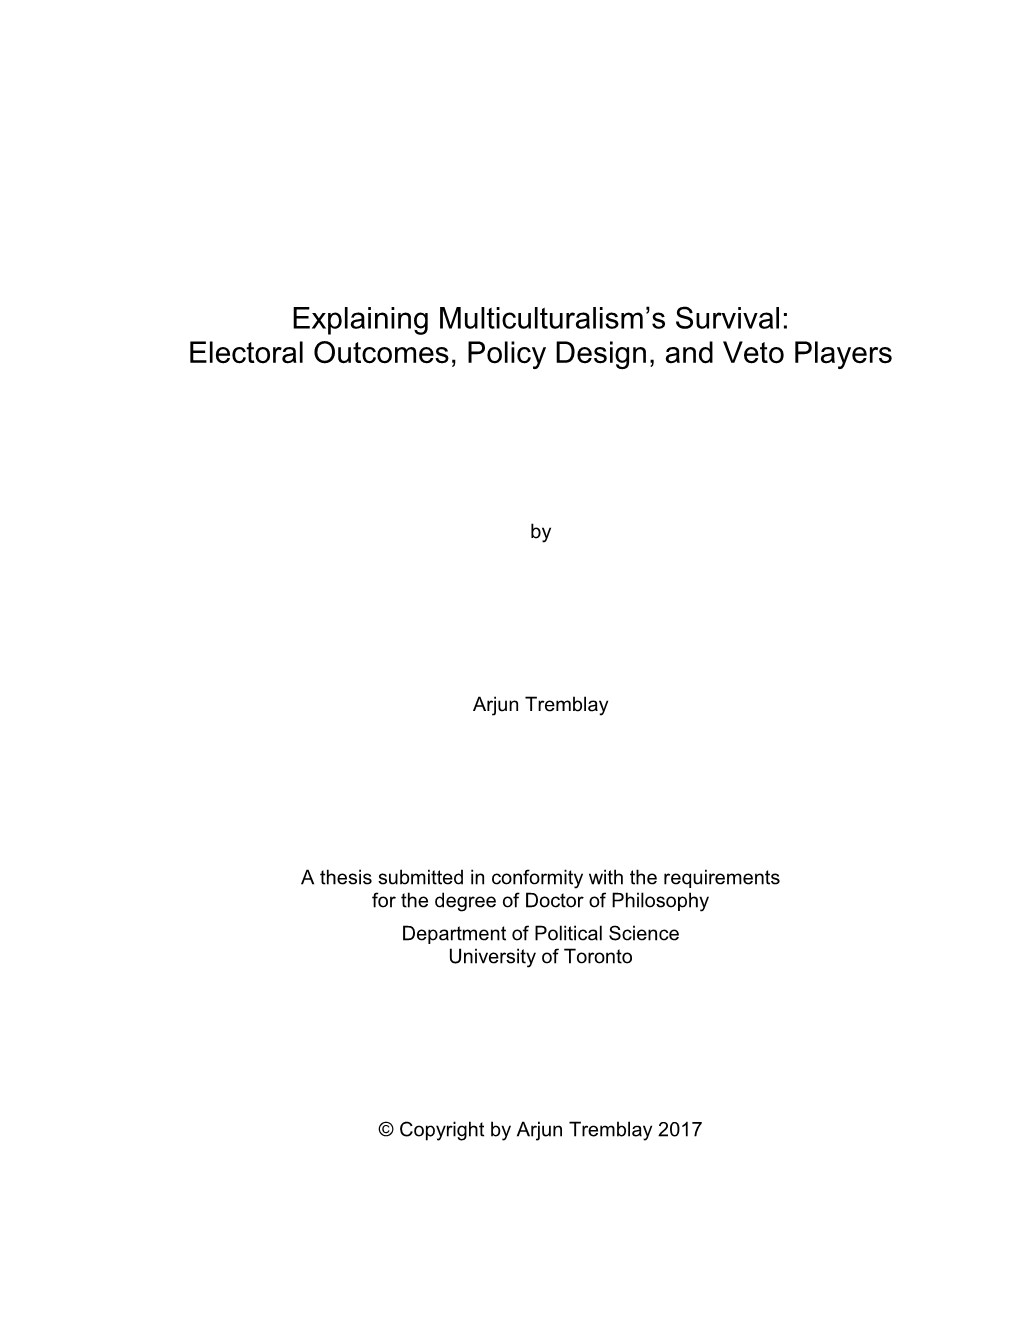 Explaining Multiculturalism's Survival: Electoral Outcomes, Policy Design